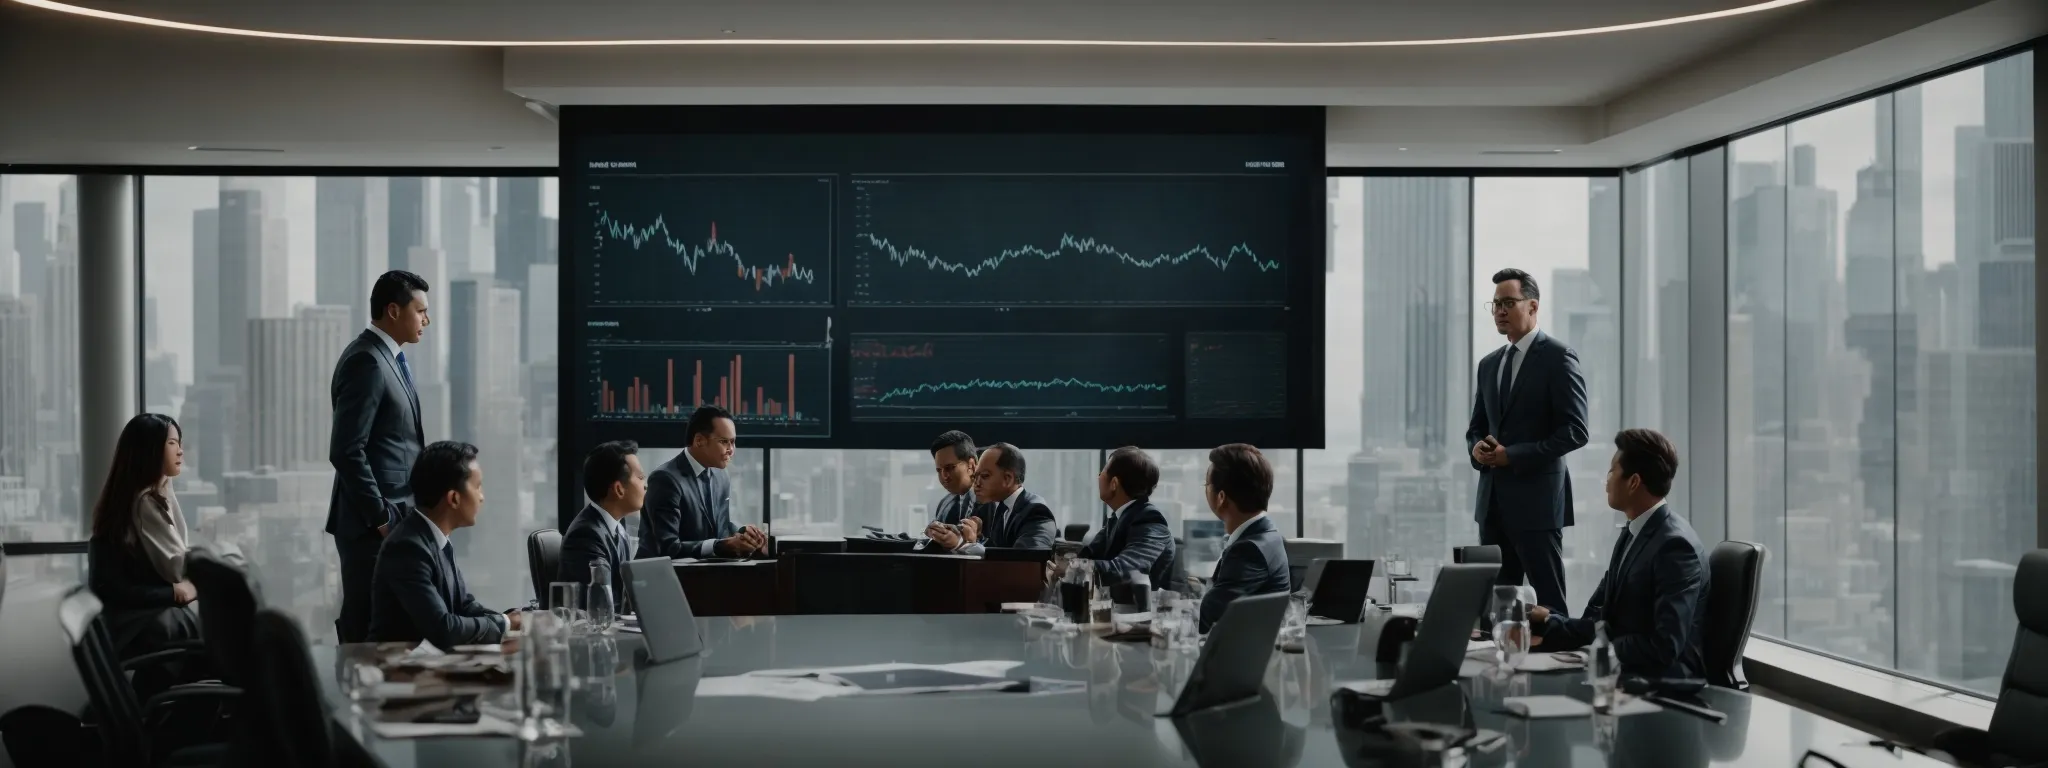 a boardroom with executives discussing around a large screen displaying graphs and charts.